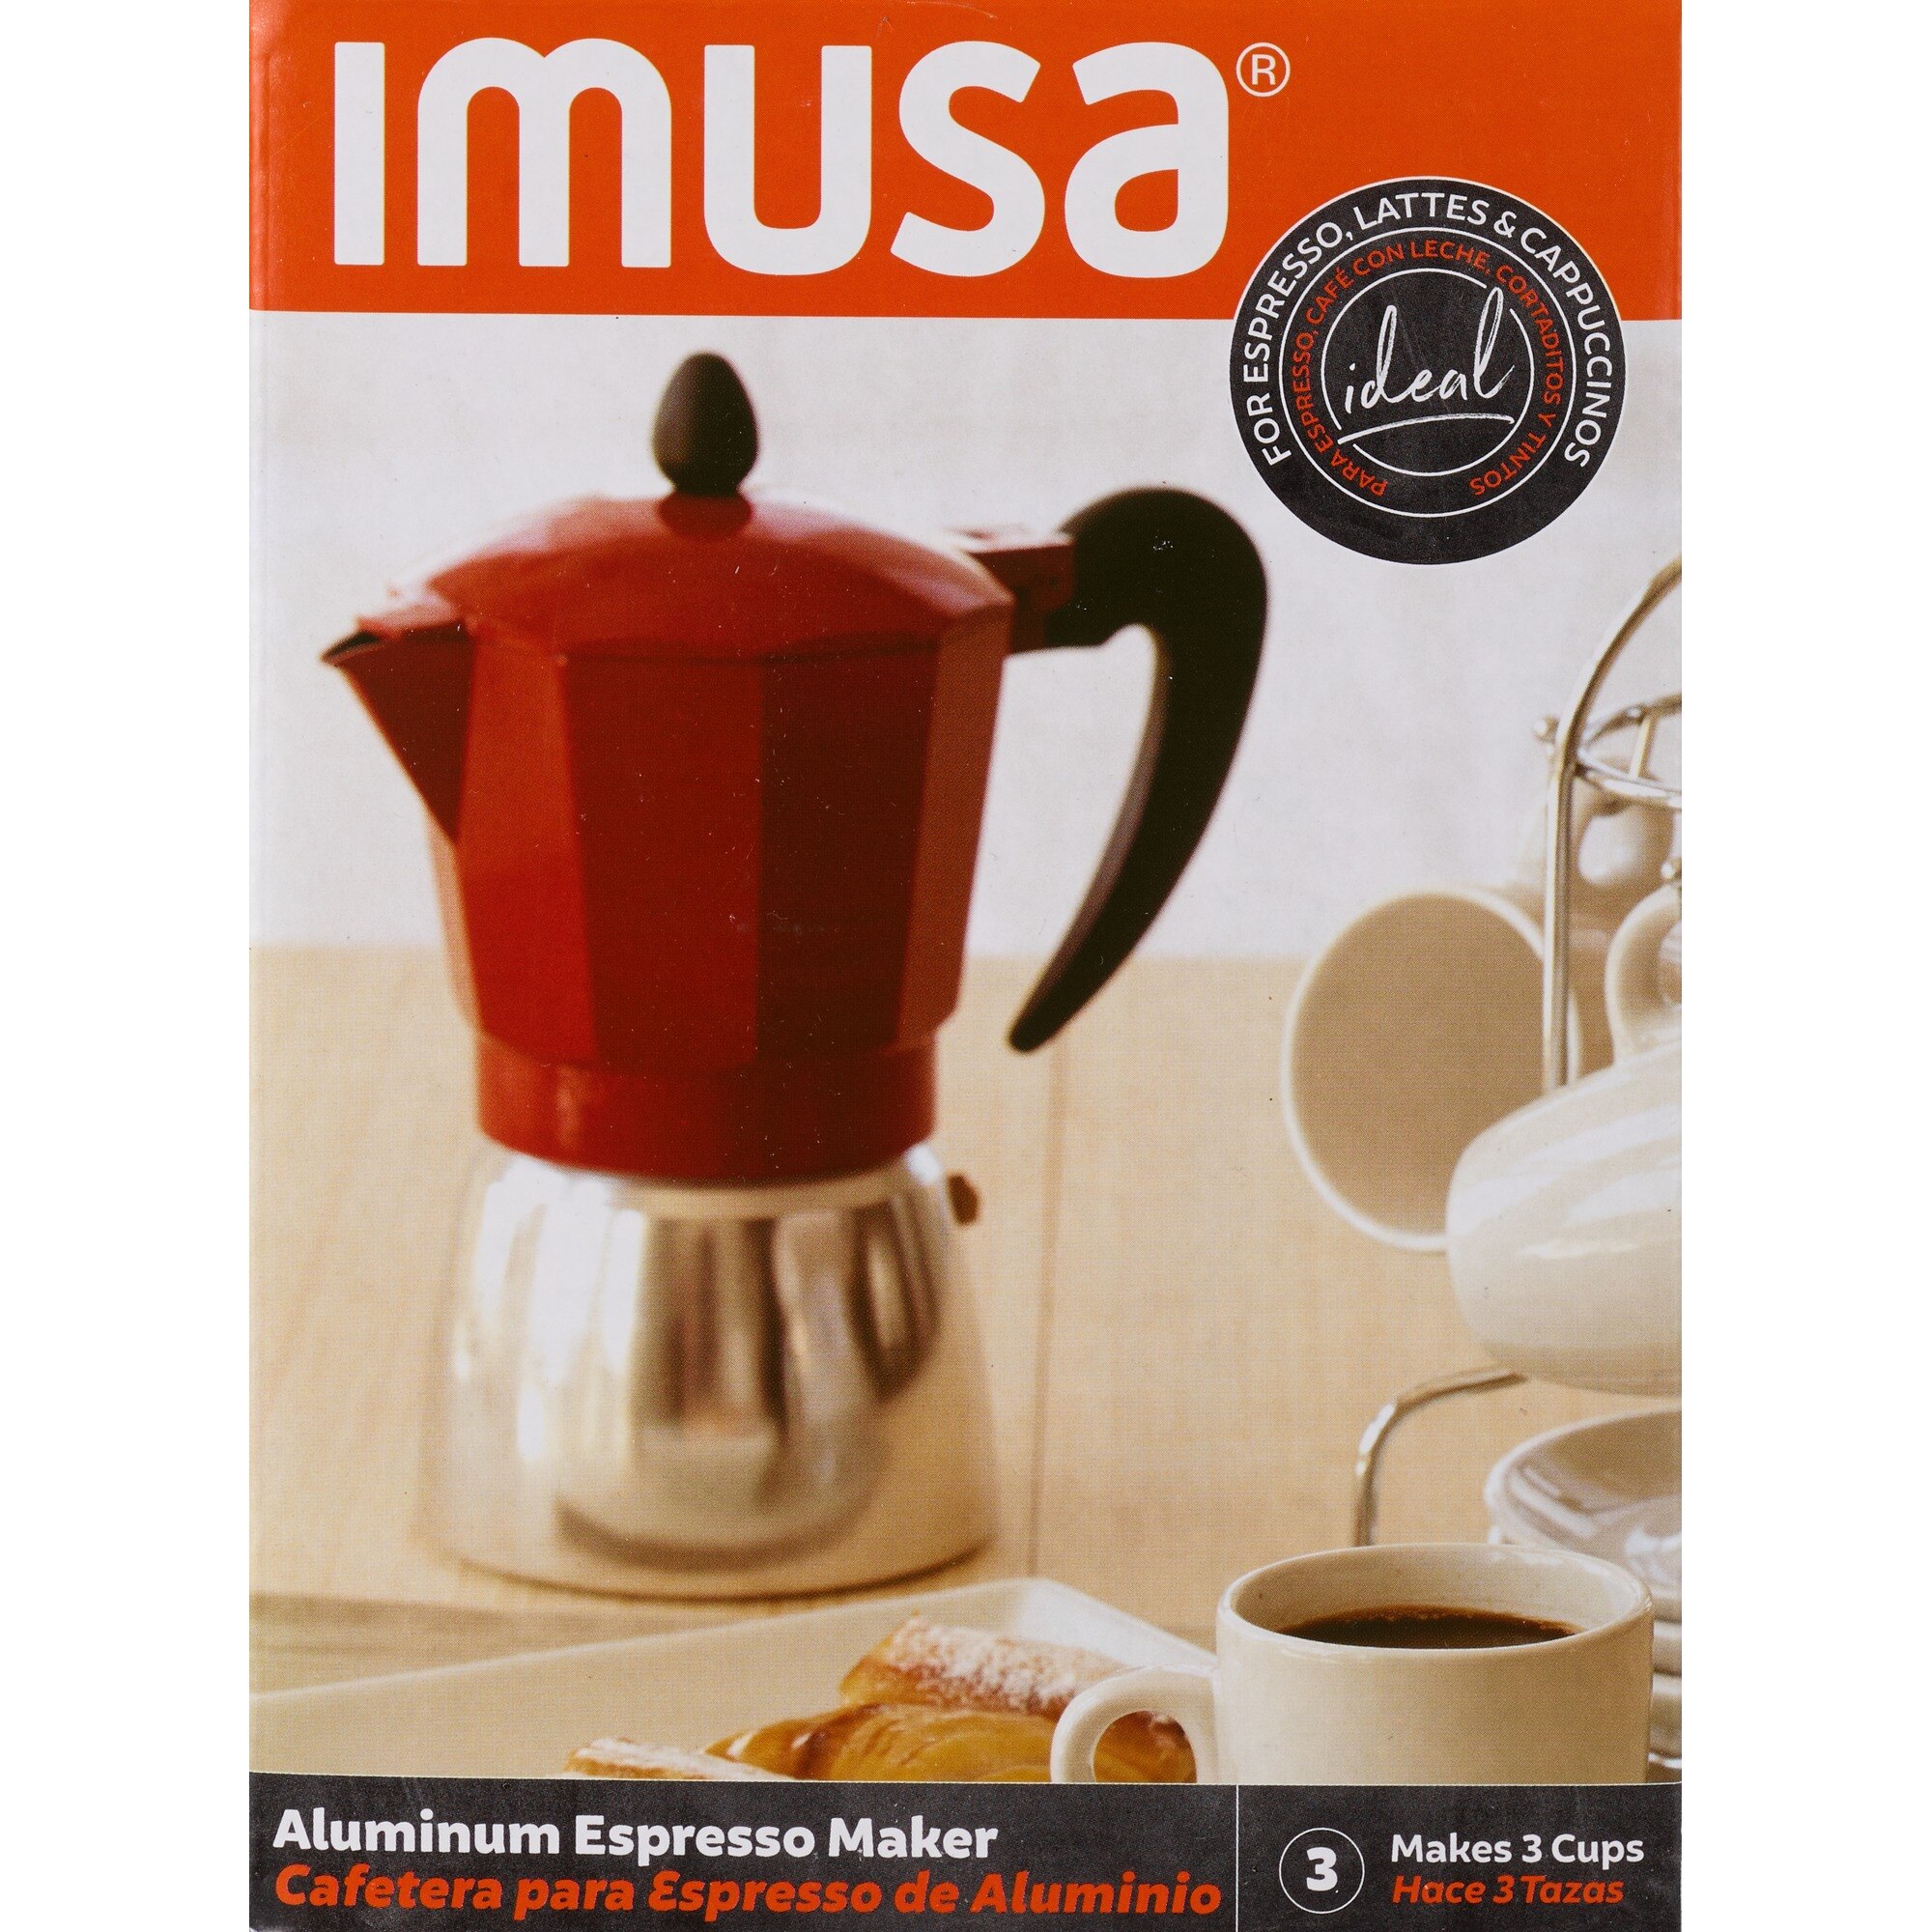 IMUSA Top Traditional Stovetop Coffeemaker, Red, 3 CUP